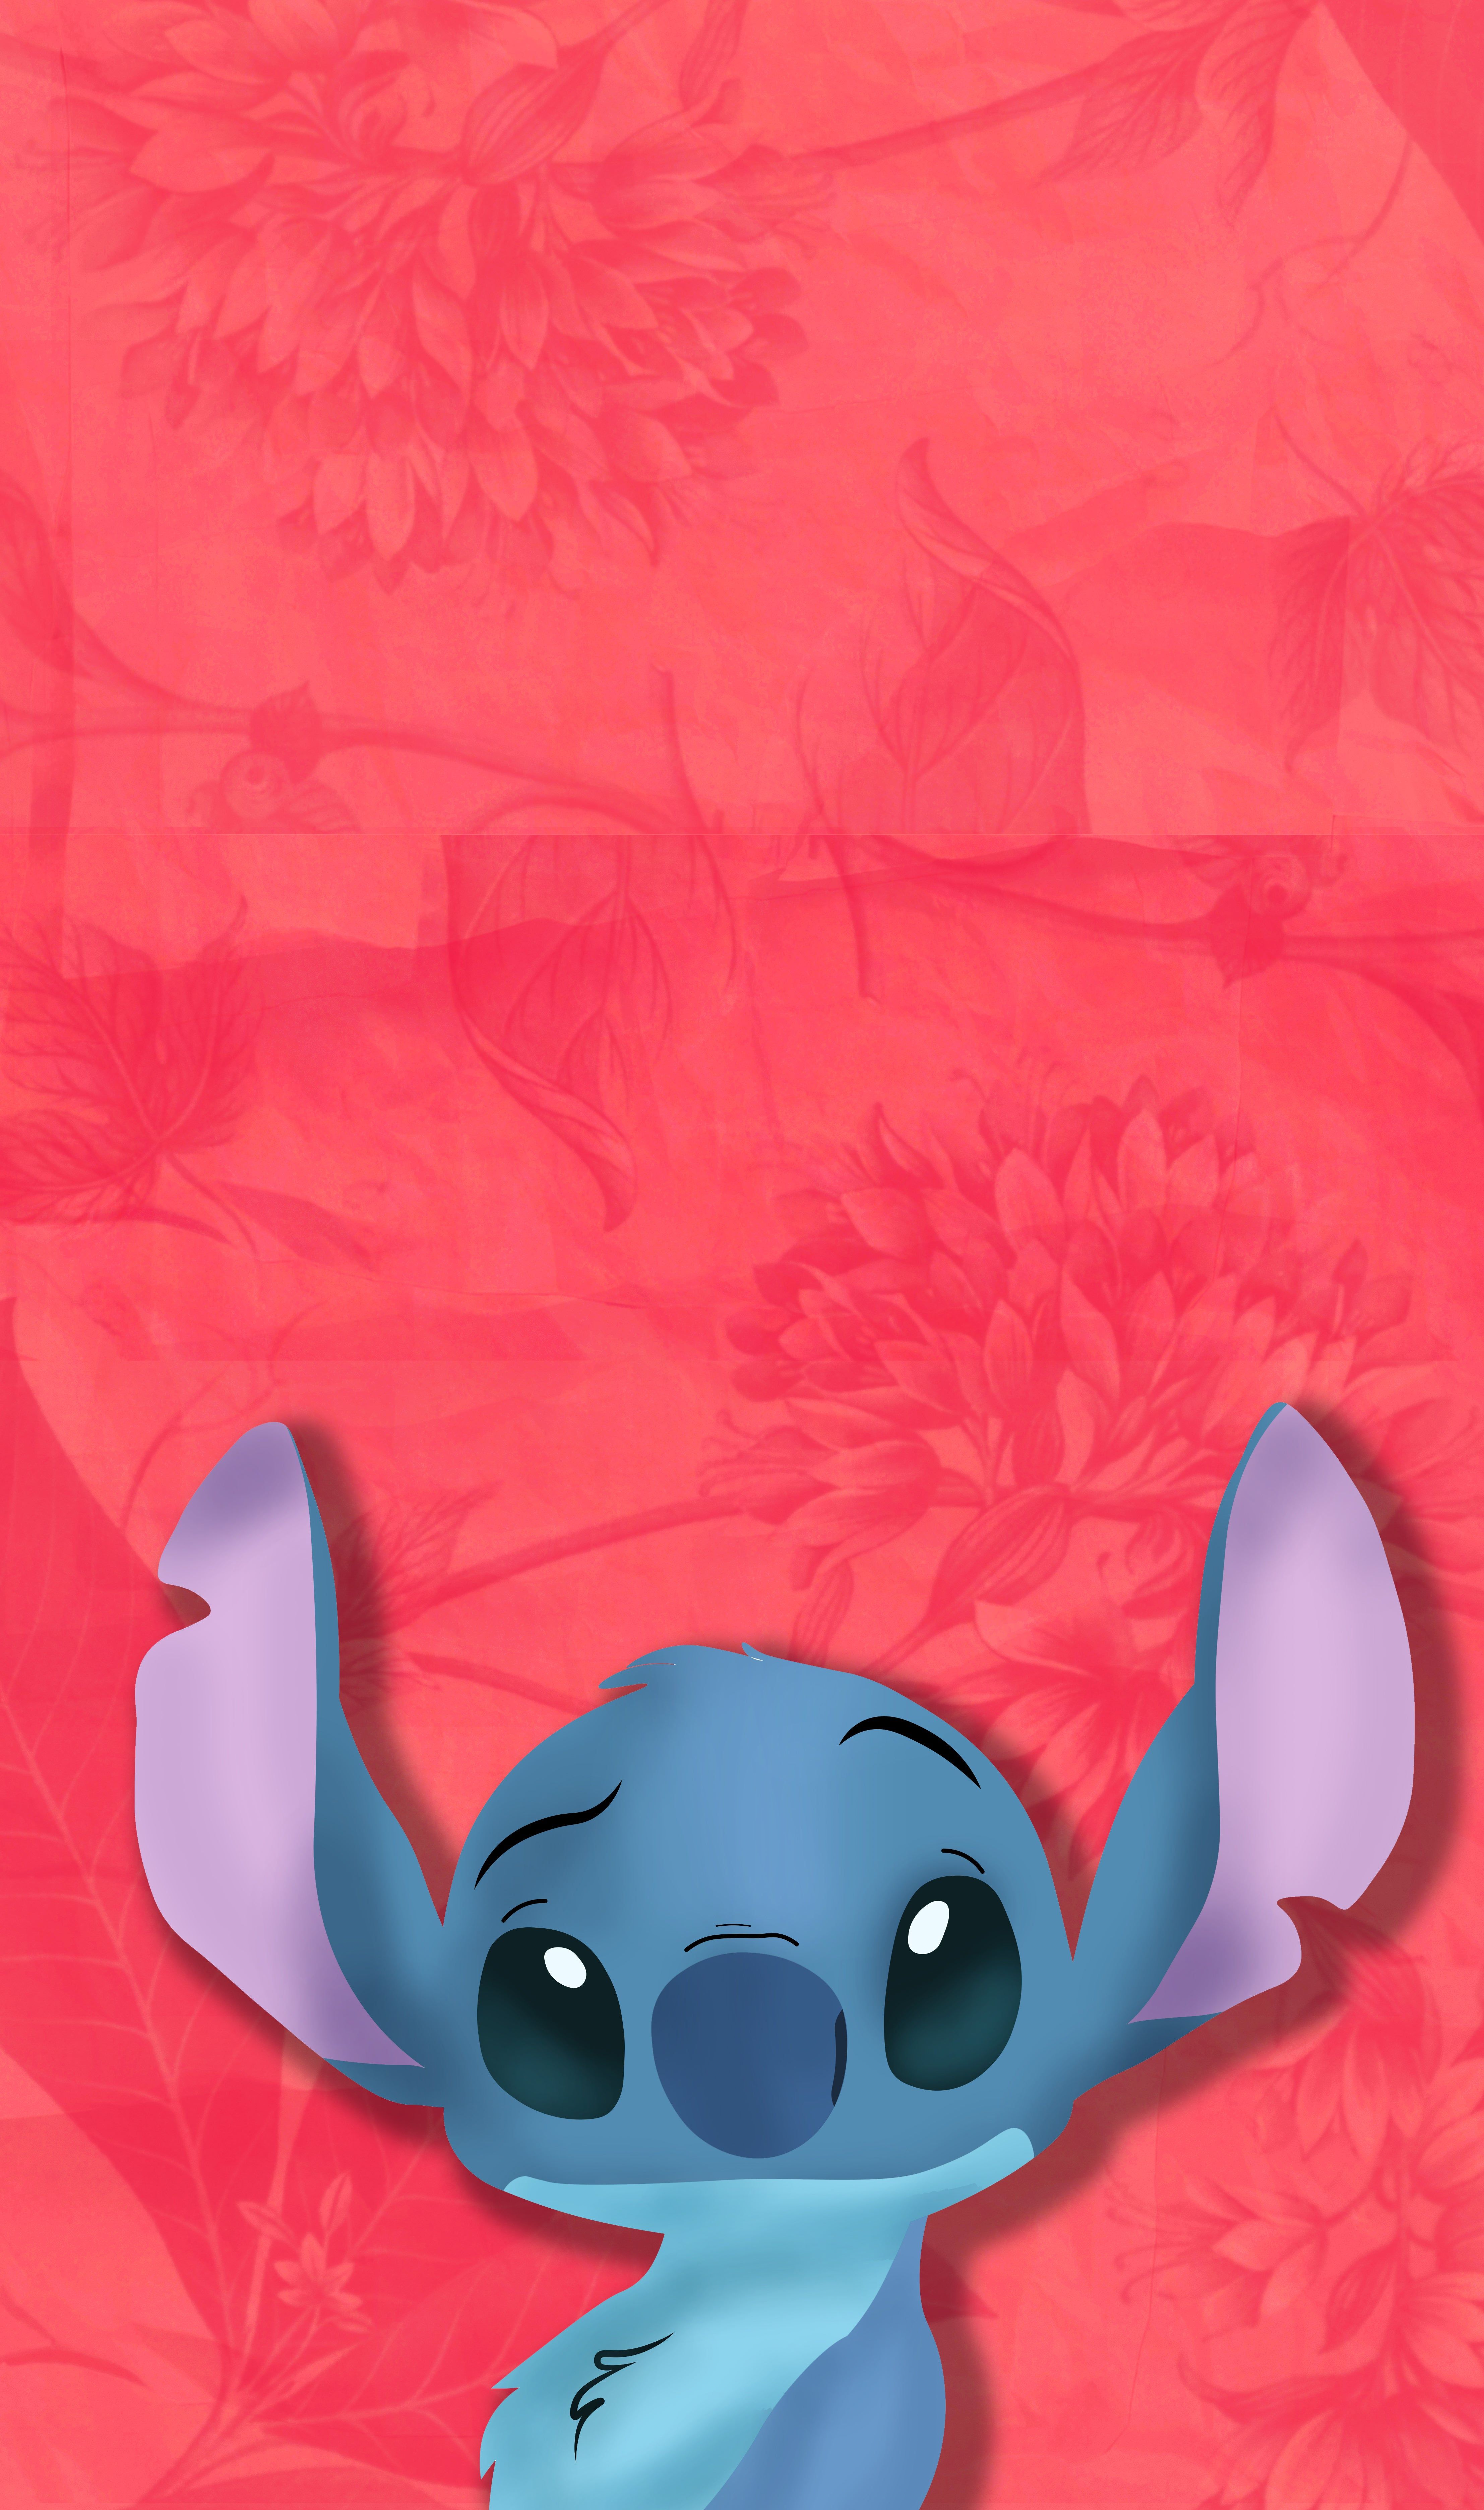 A stitch wallpaper I made recently. Hope y'all like it